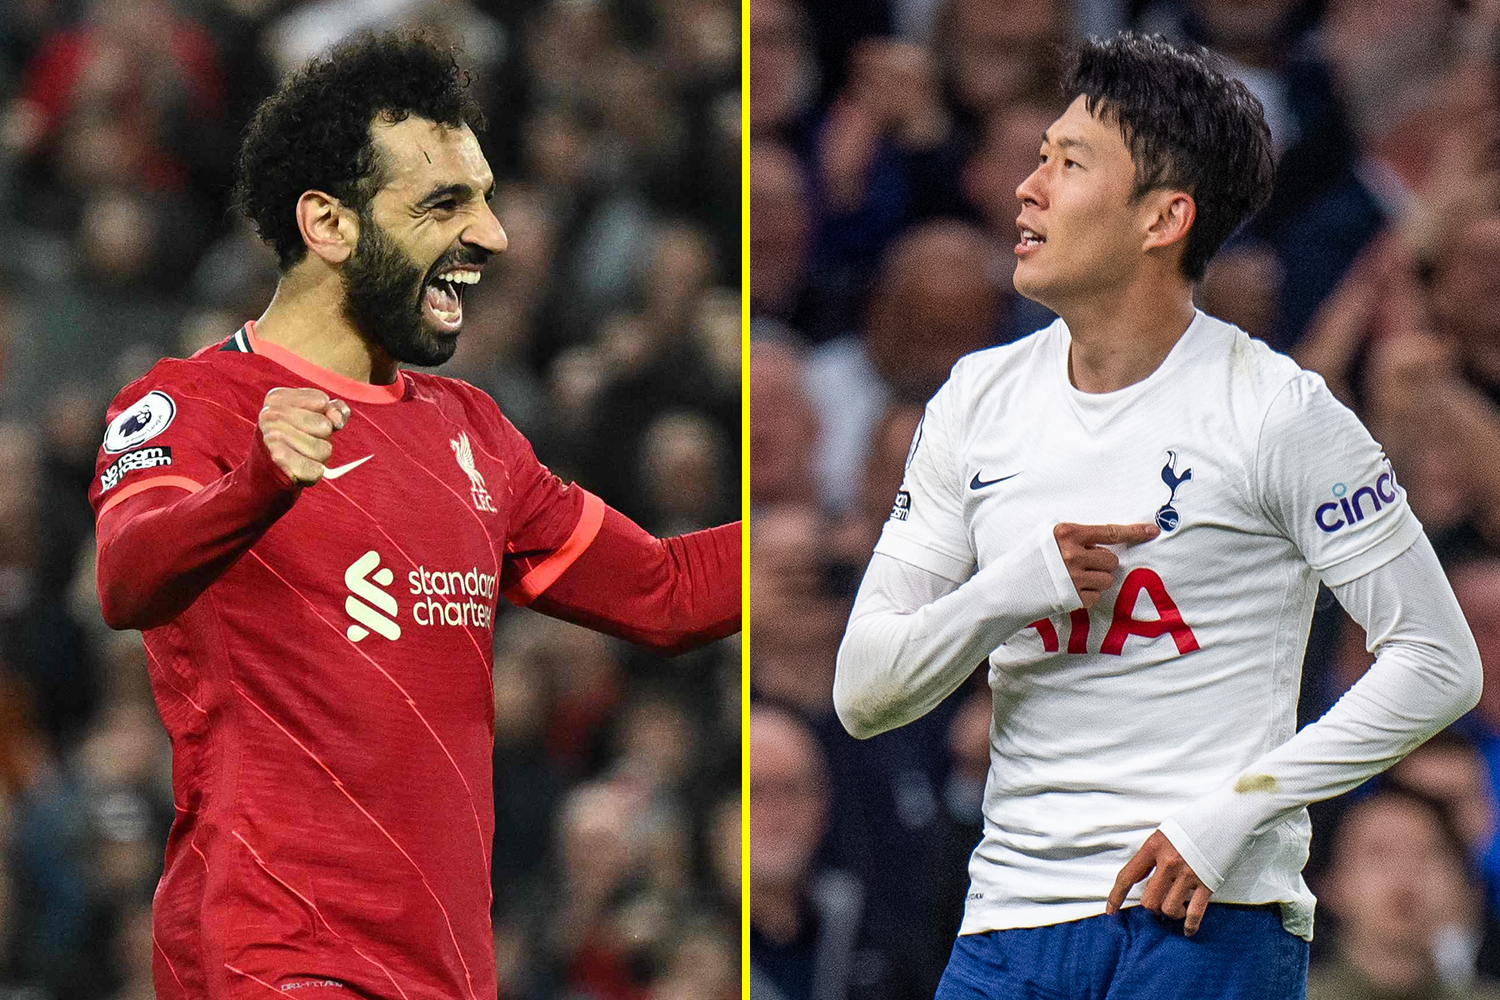 Premier League 2021/22: Tottenham’s Son Heung-min becomes first Asian to win Premier League’s Golden Boot, shares award with Mohamed Salah